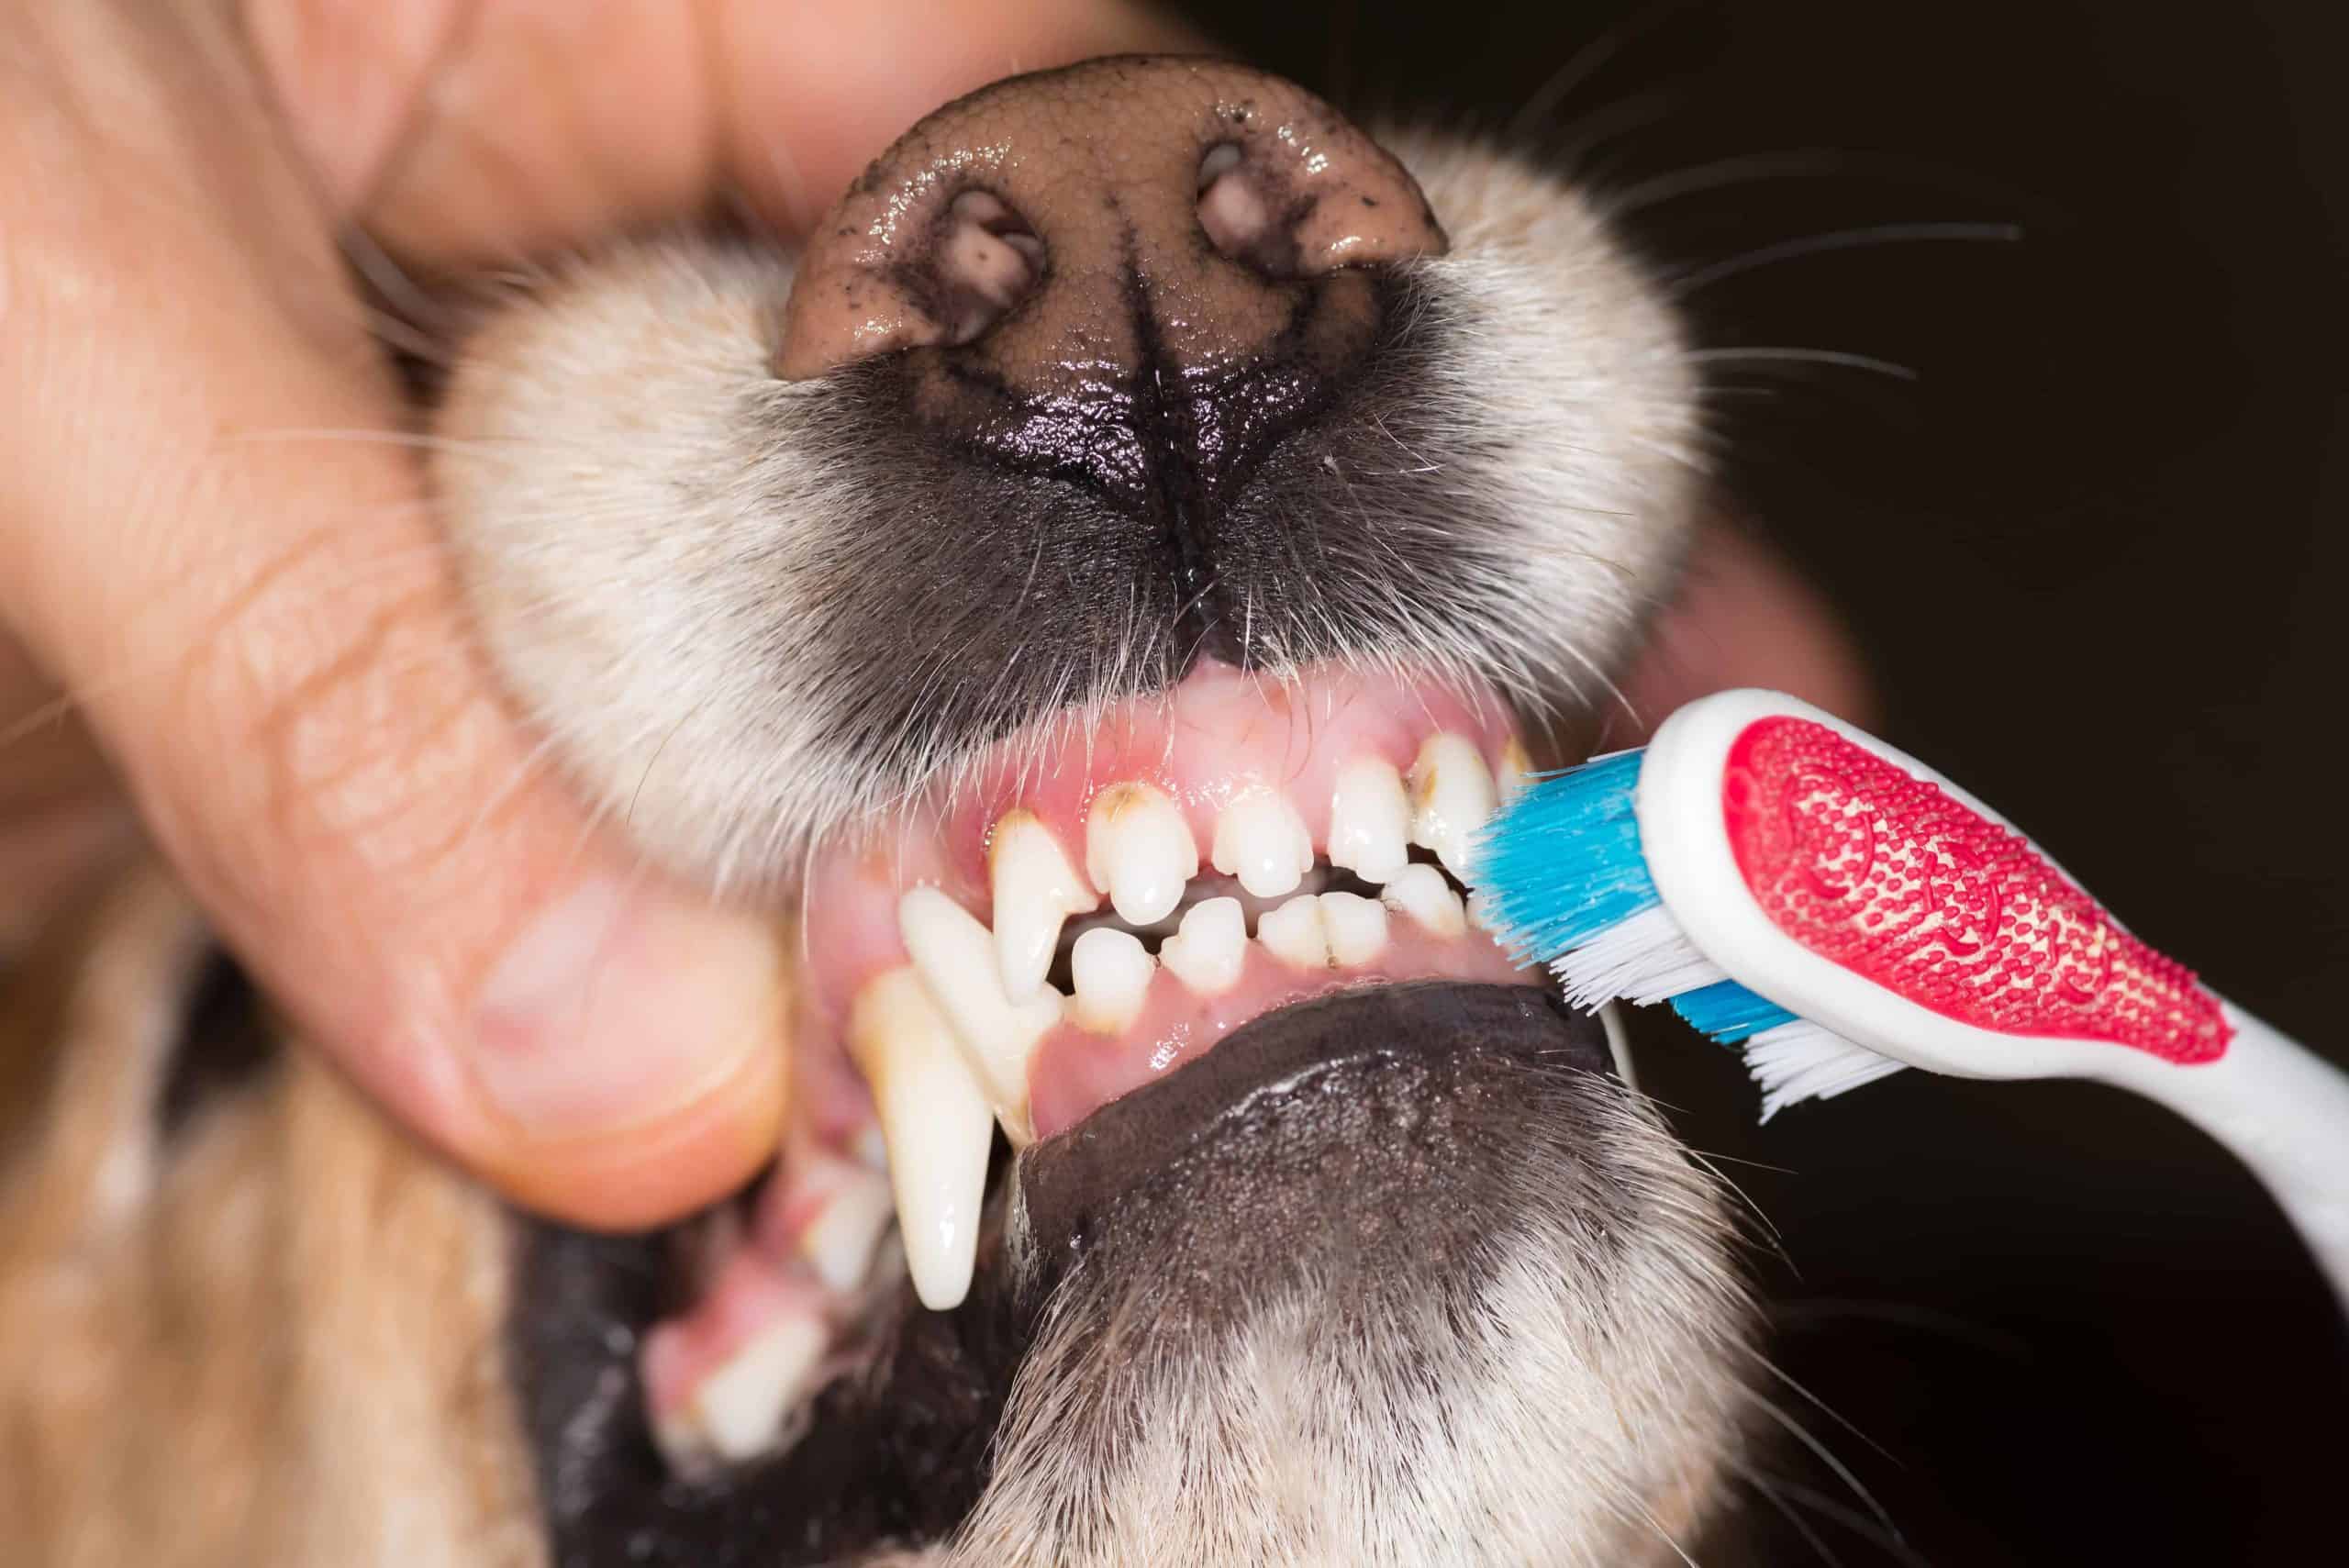 Owner brushes dog's teeth. Brush your dog's teeth daily to his good health. Canine periodontal disease can lead to serious health conditions.